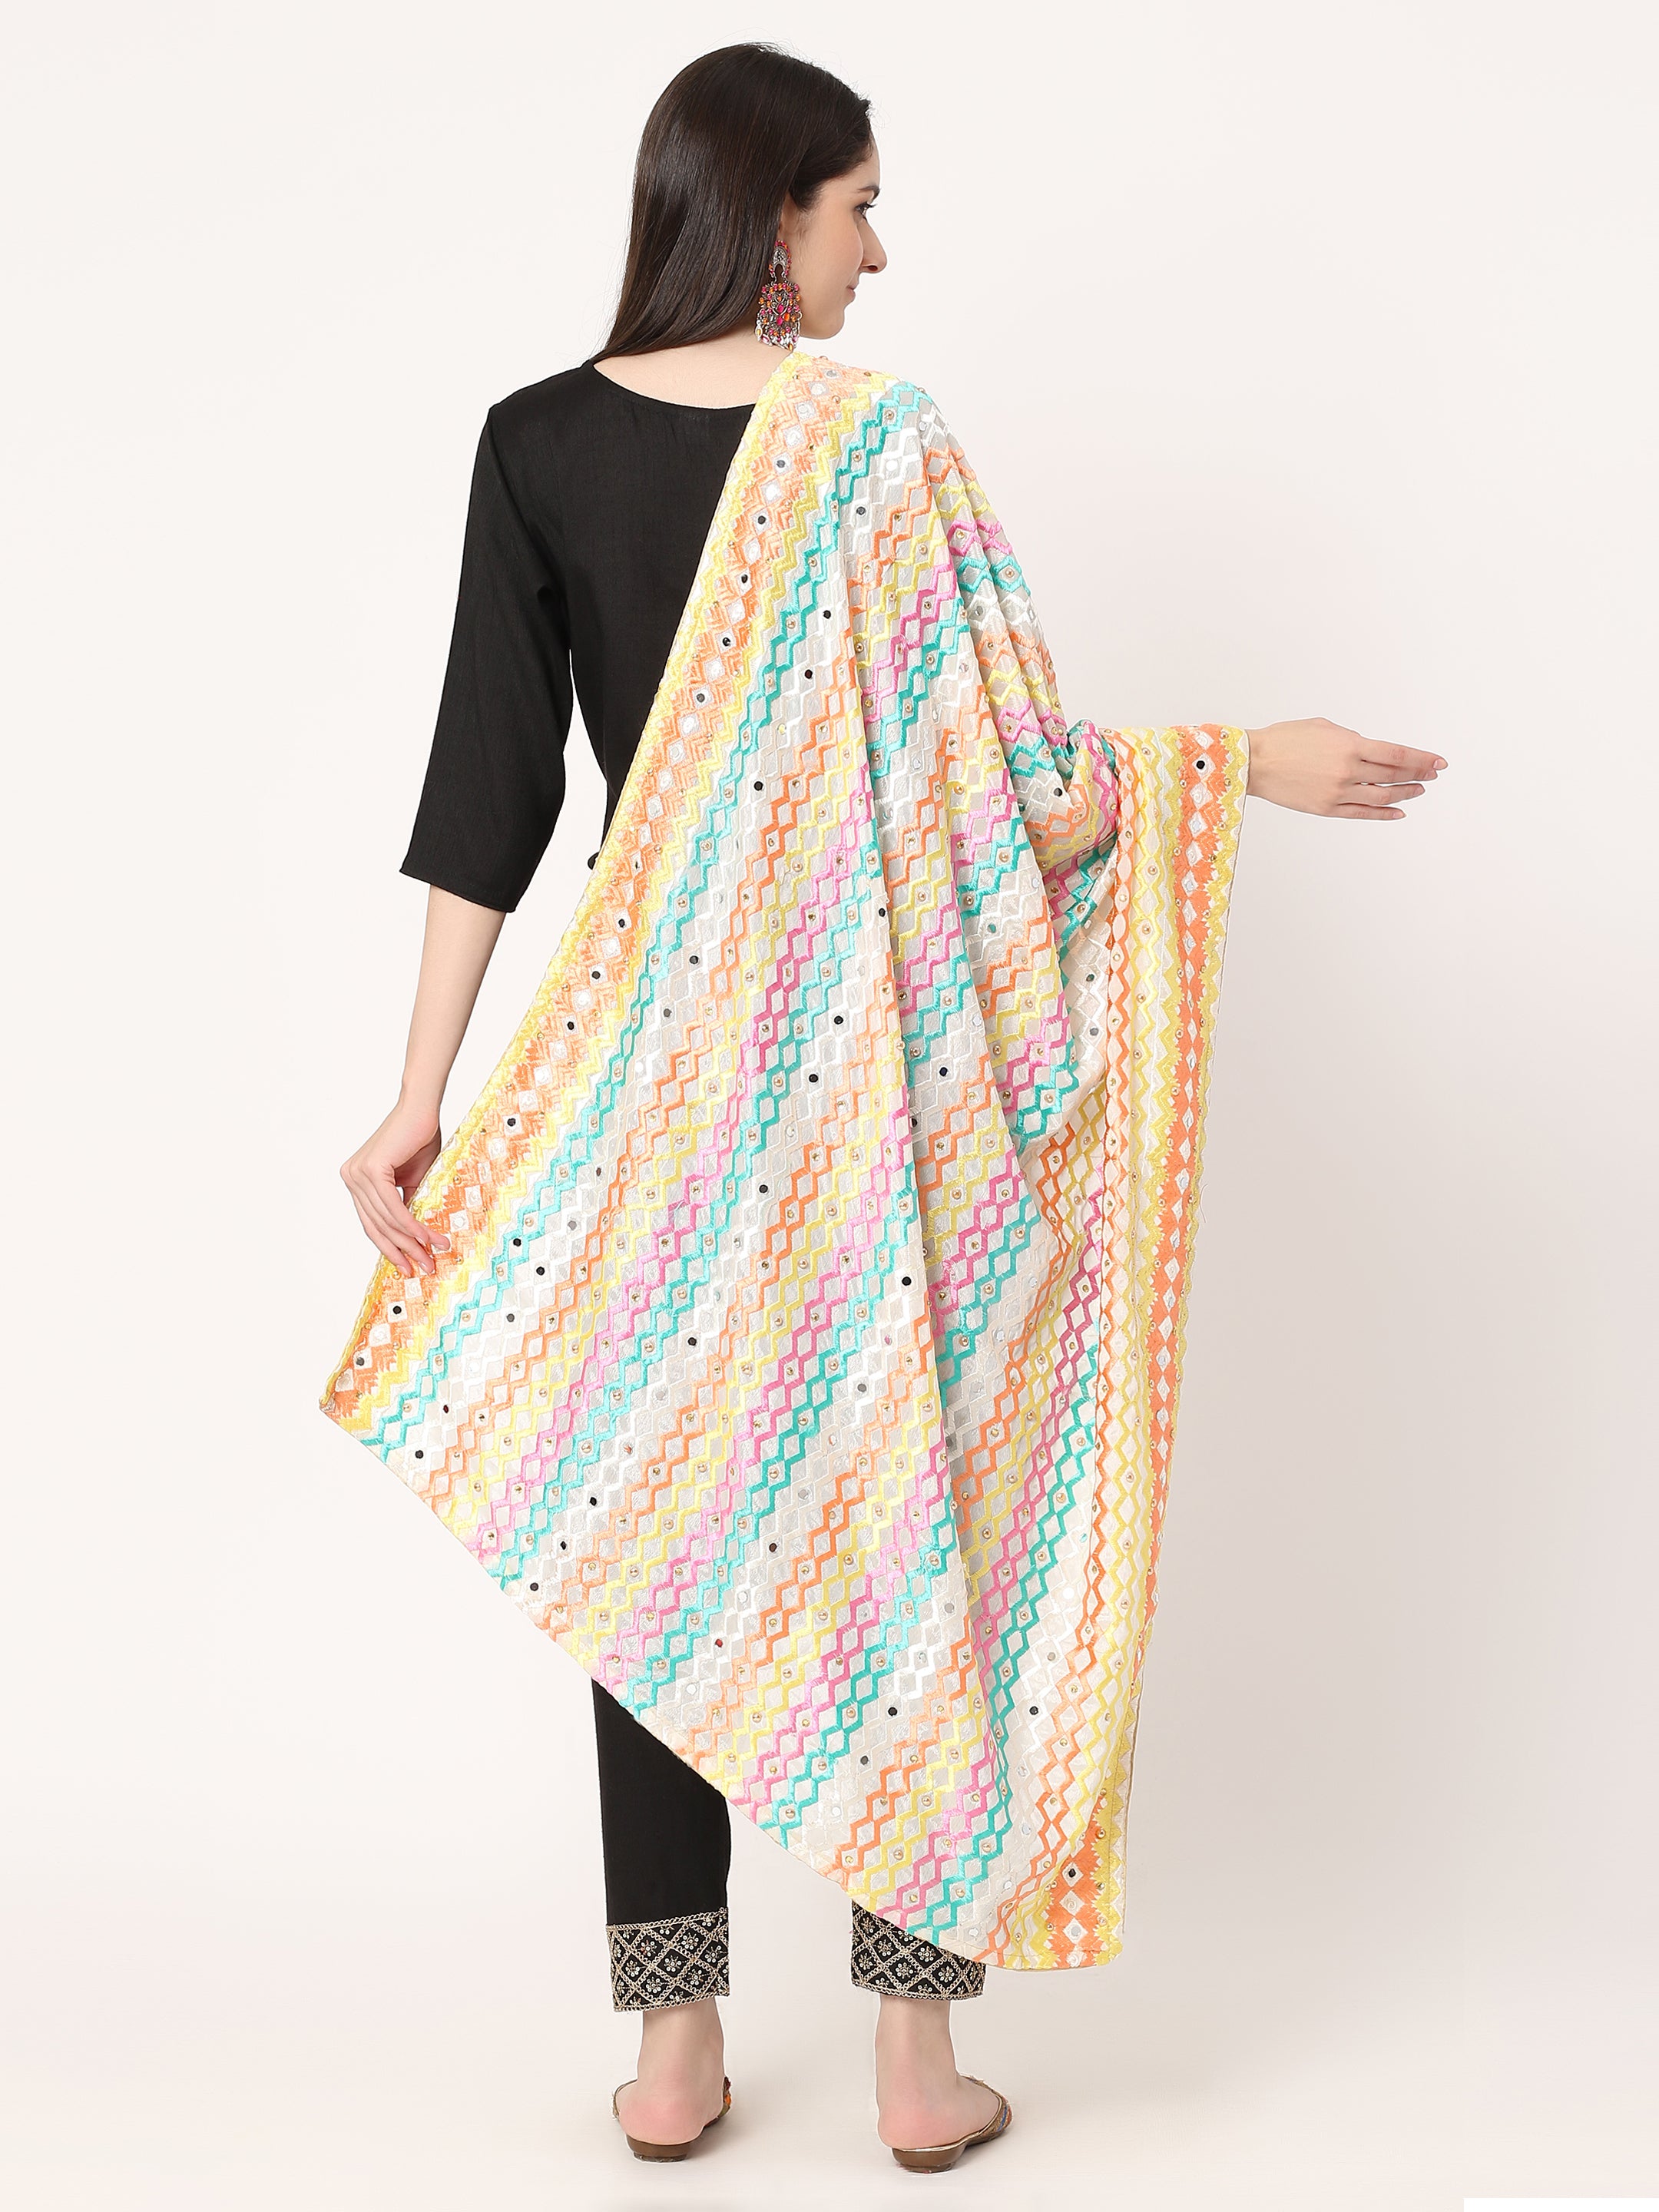 off-white-multicolour-embroidery-phulkari-dupatta-with-beads-and-pearl-mcrcpd0204-moda-chales-3